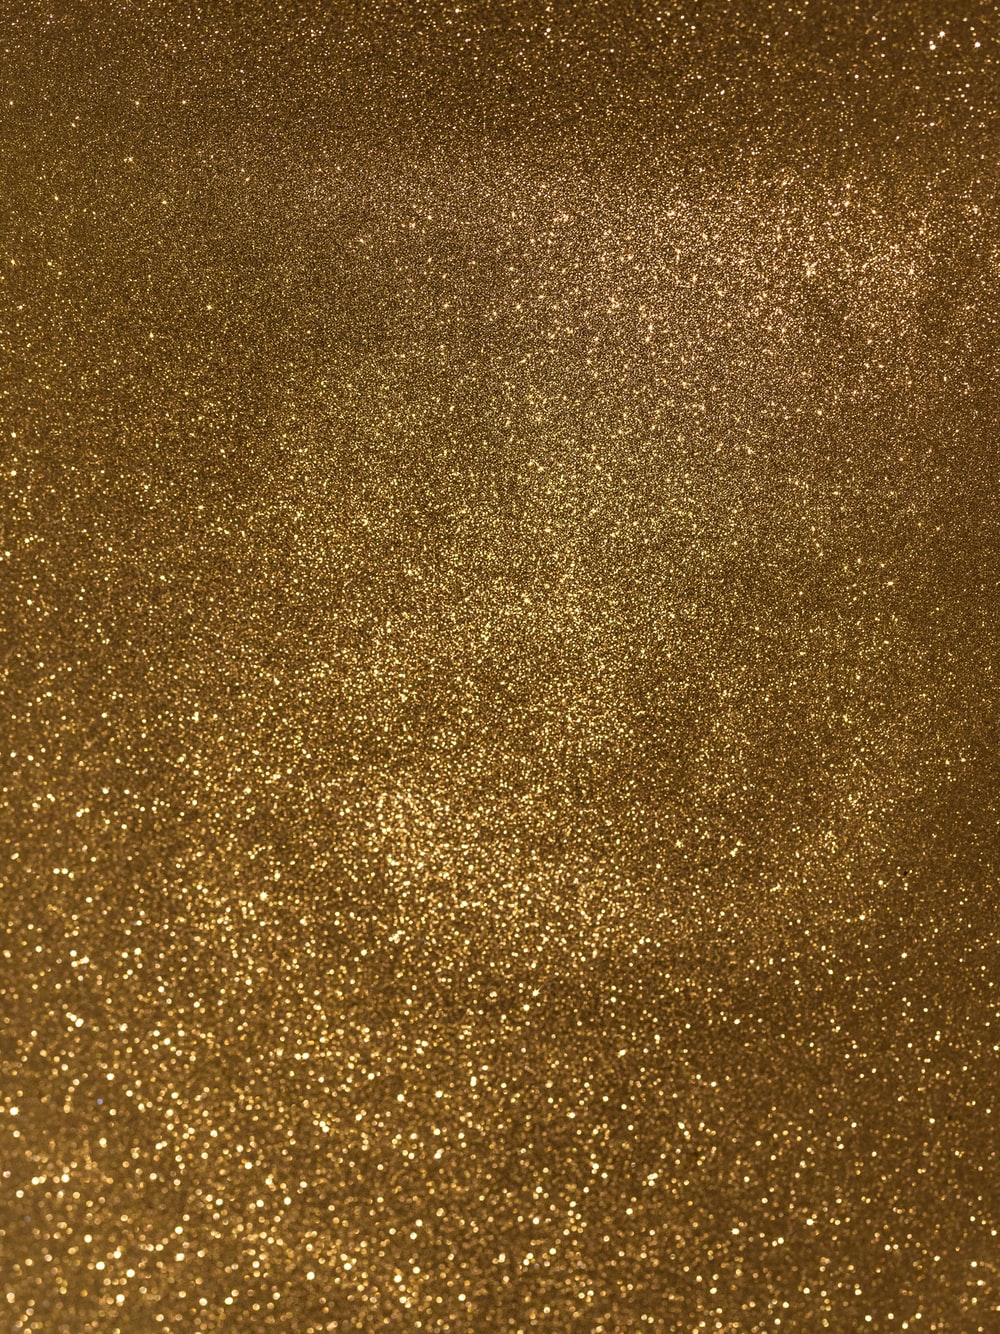 Gold Glitter Picture. Download Free Image